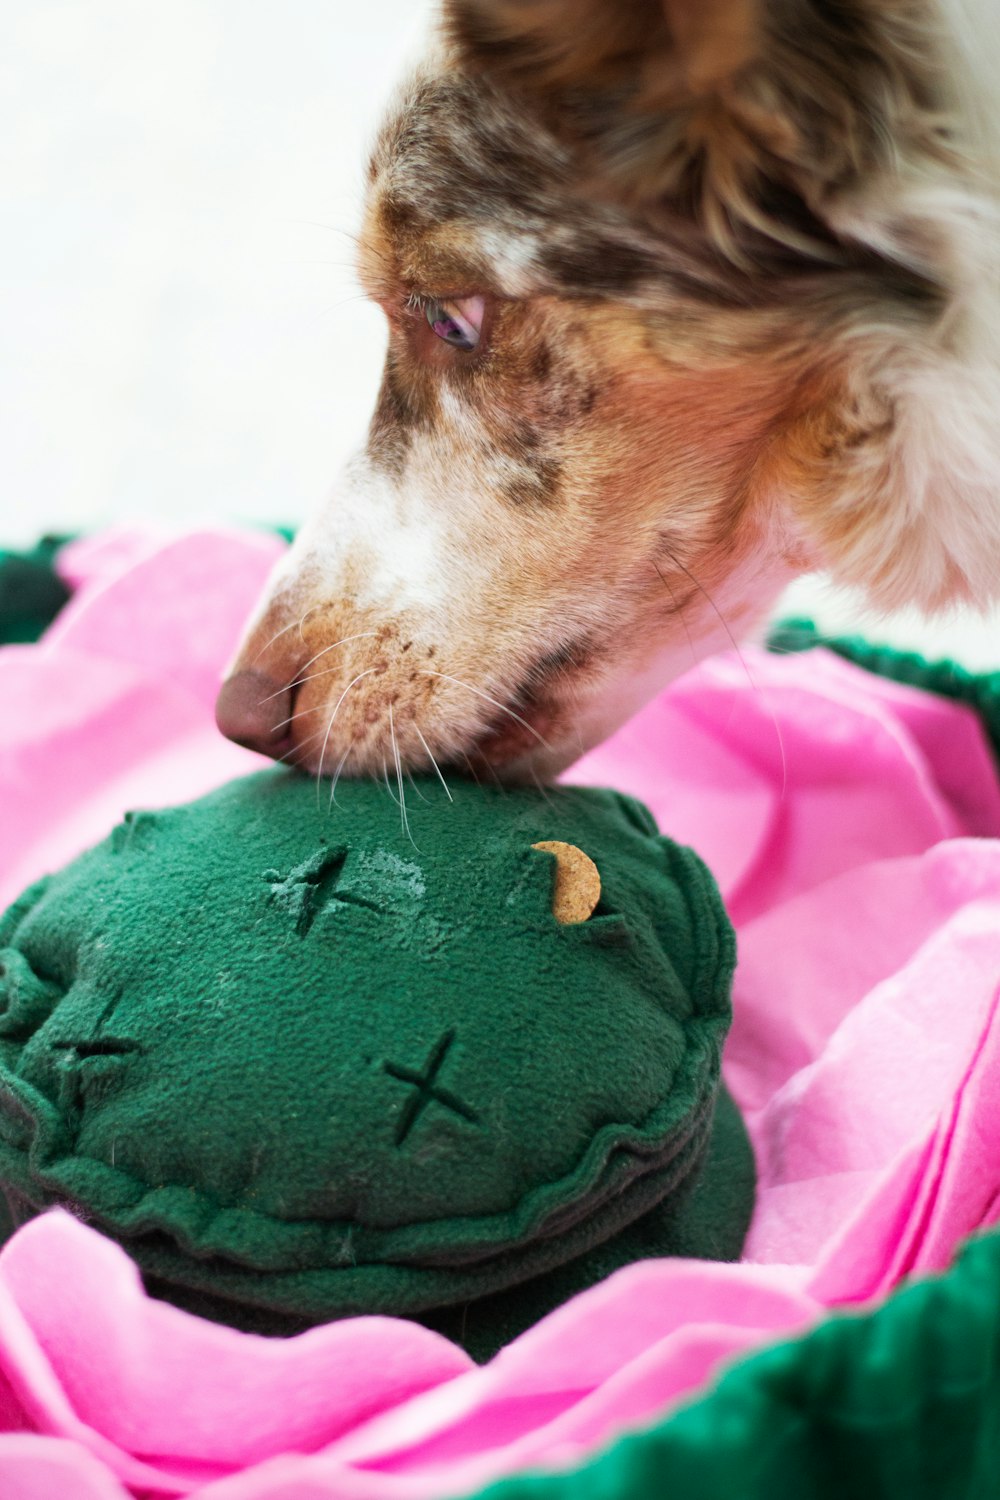 a dog playing with a green stuffed animal